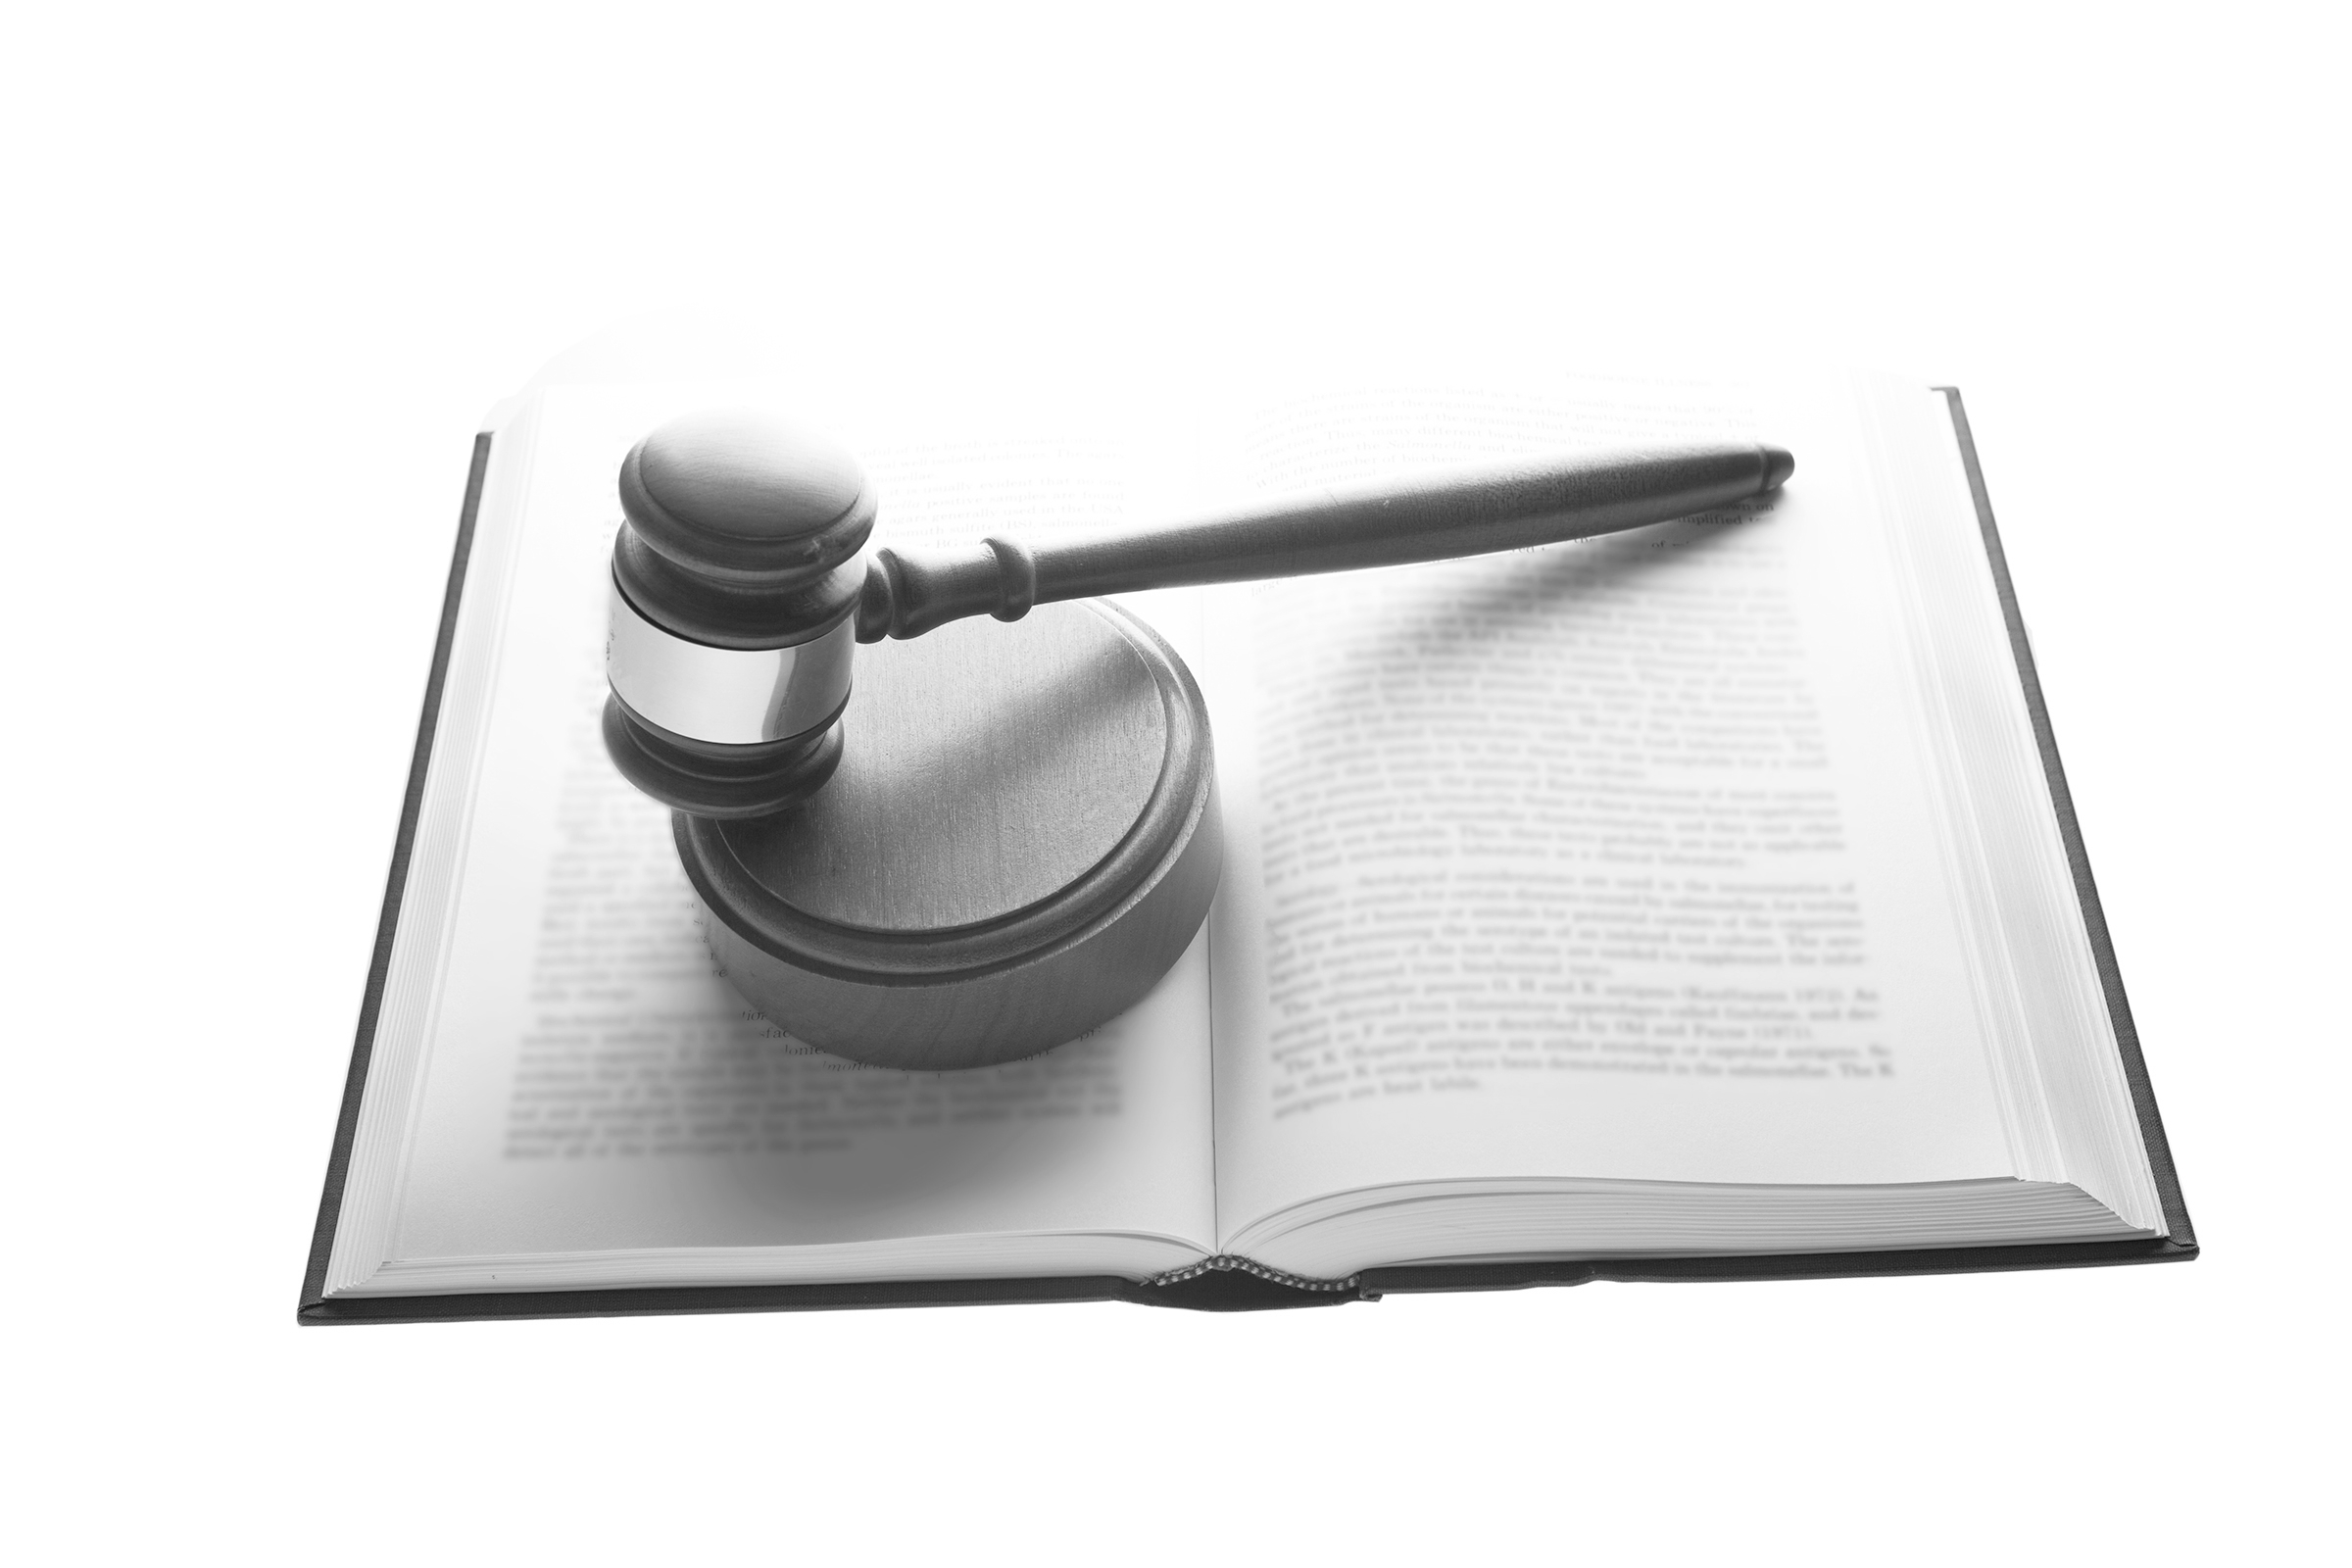 Gavel and book.